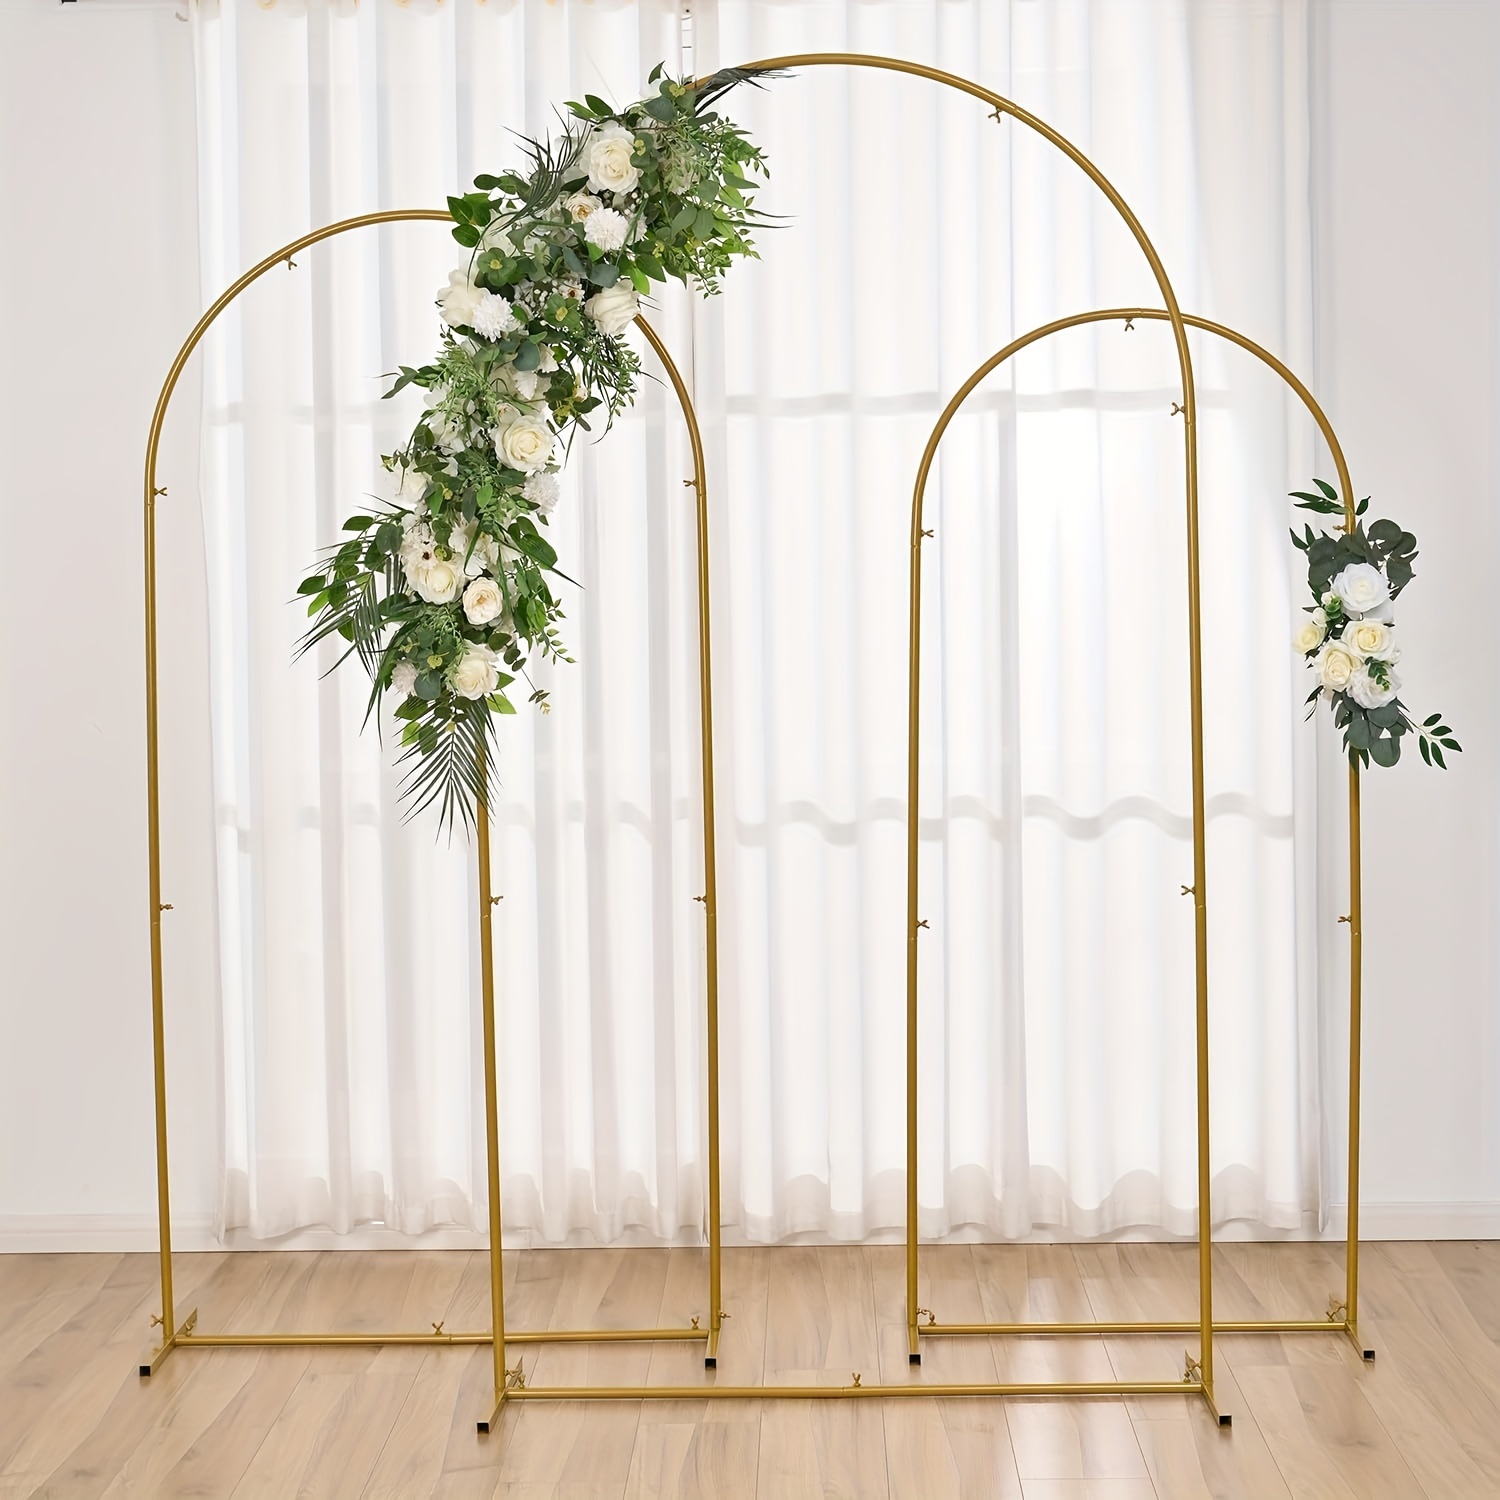 

Wedding Arch Backdrop Stand Set Of 3 Gold Metal Arch For Wedding Ceremony Baby Shower Birthday Party Garden Floral Balloon Arch Decoration, 7.2ft, 6.6ft, 6ft